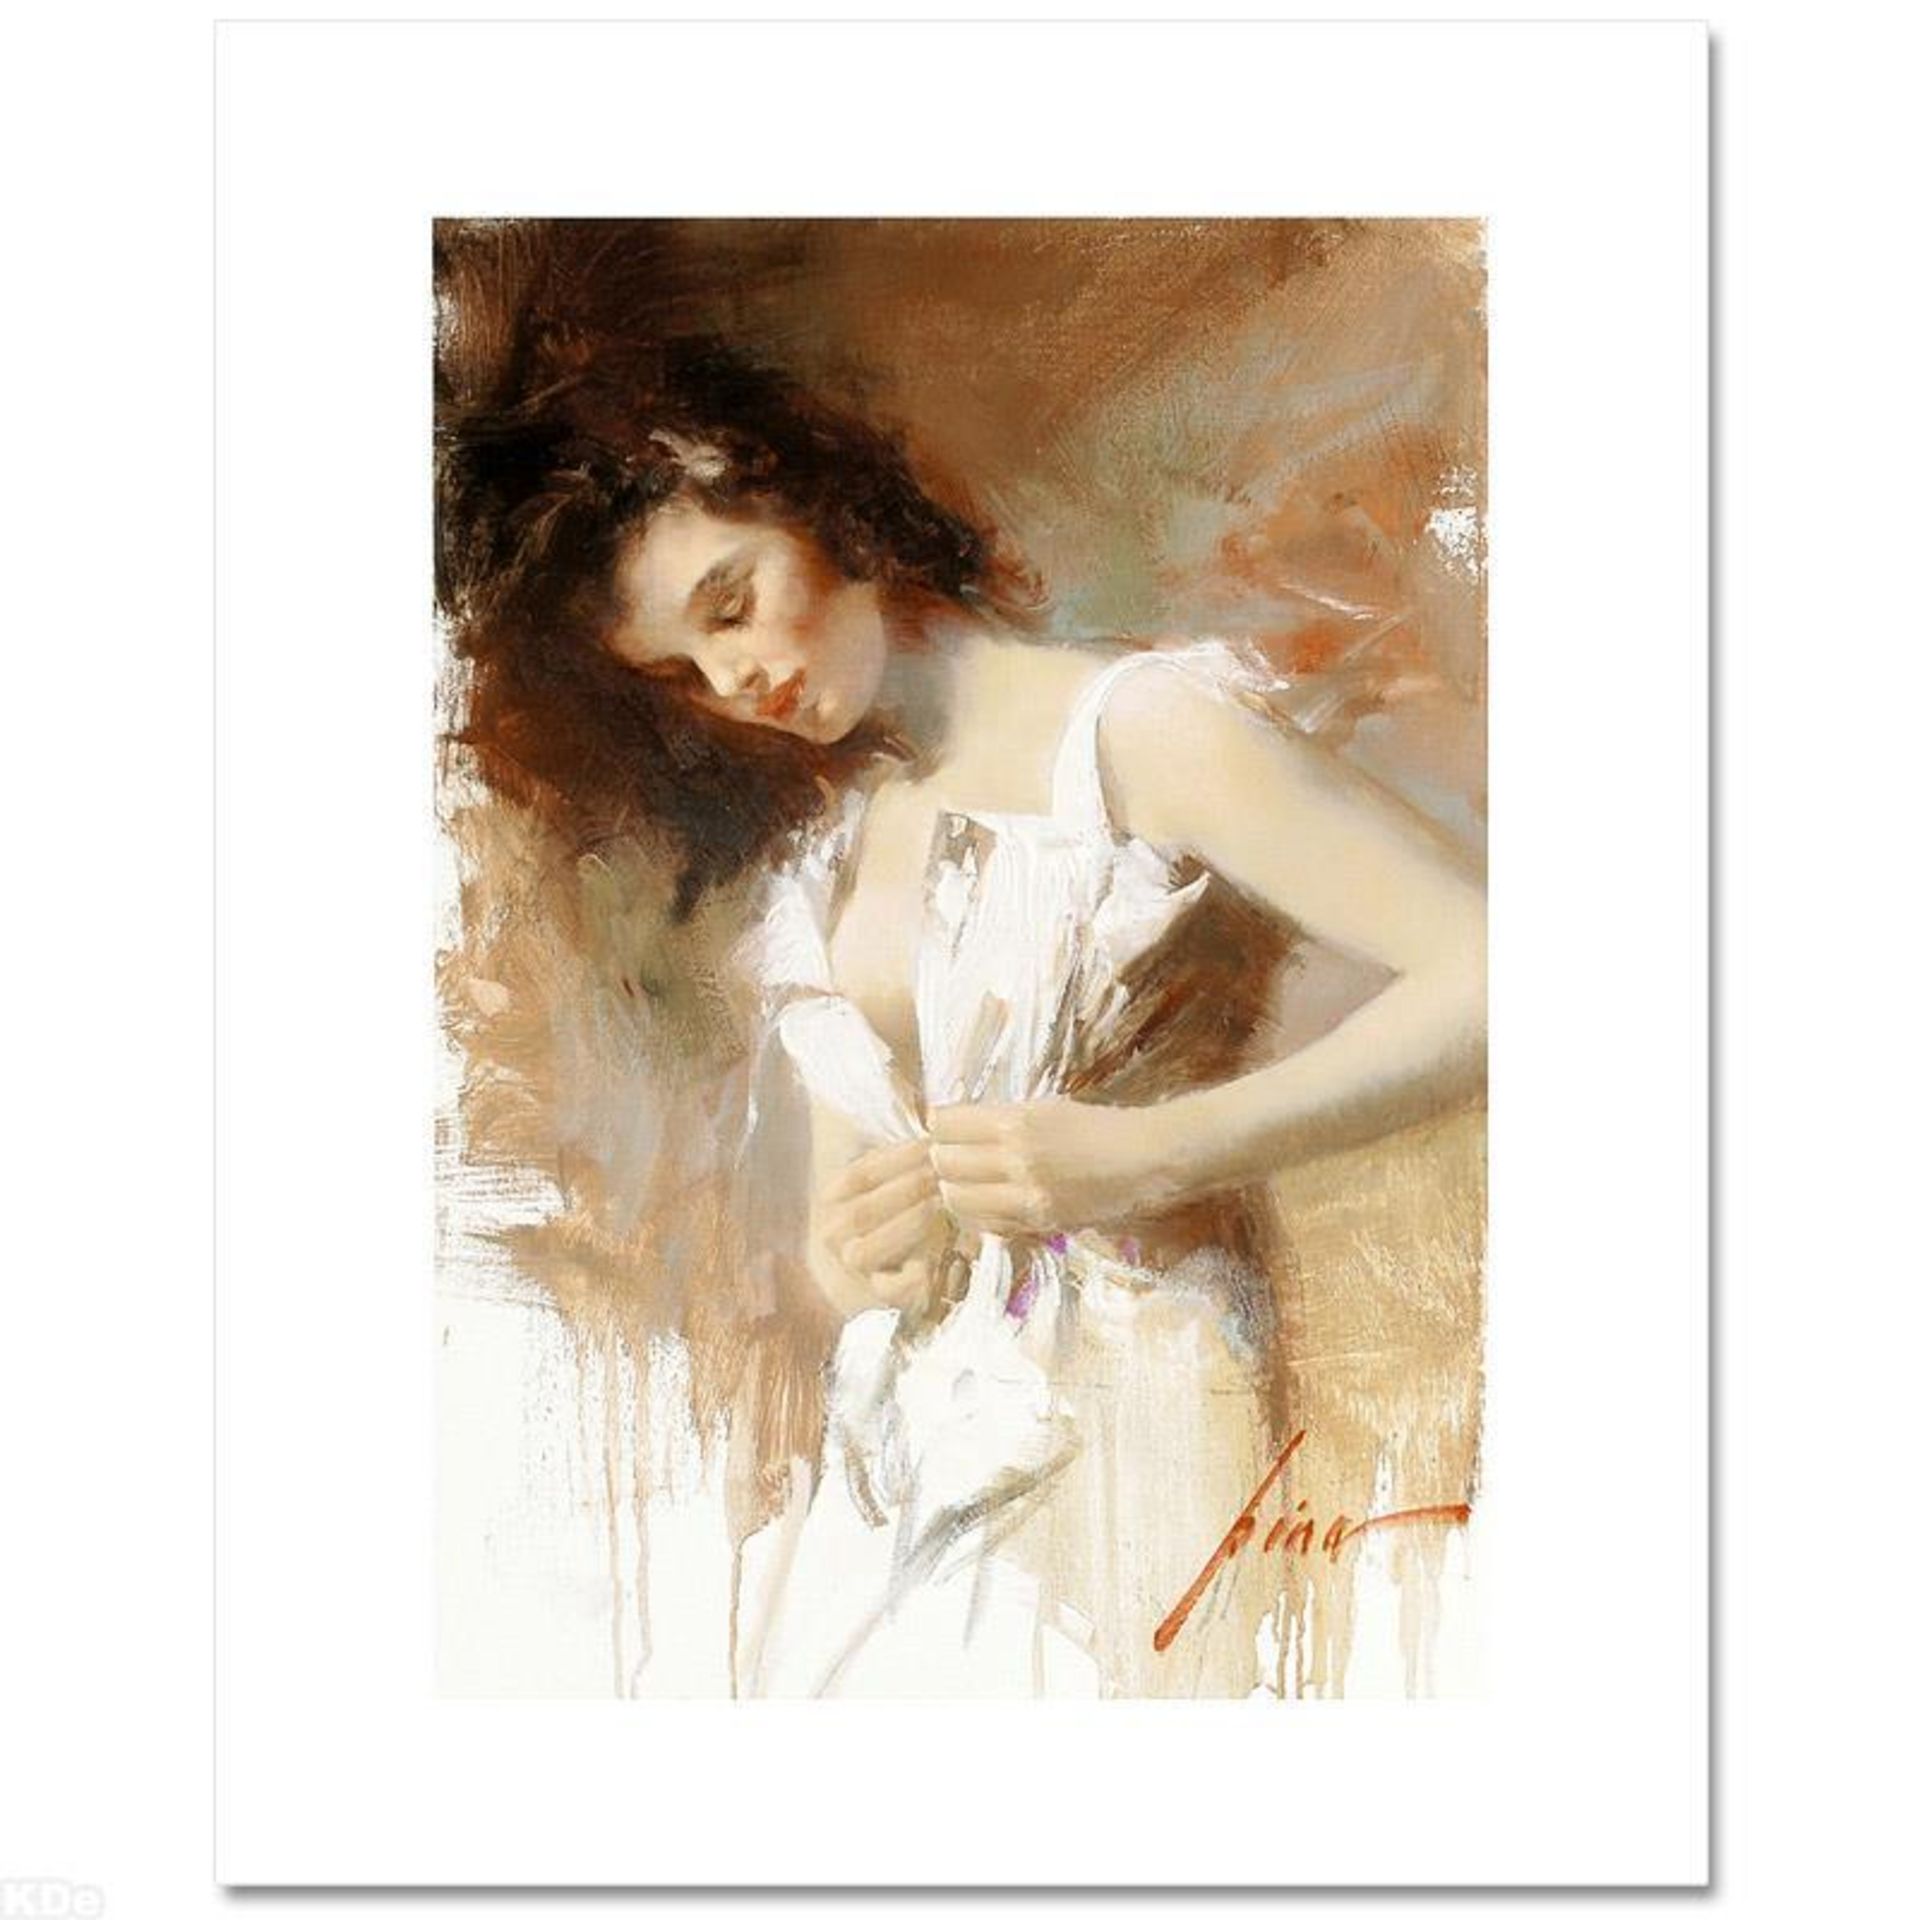 Pino (1931-2010), "White Camisole" Limited Edition on Canvas, Numbered and Hand